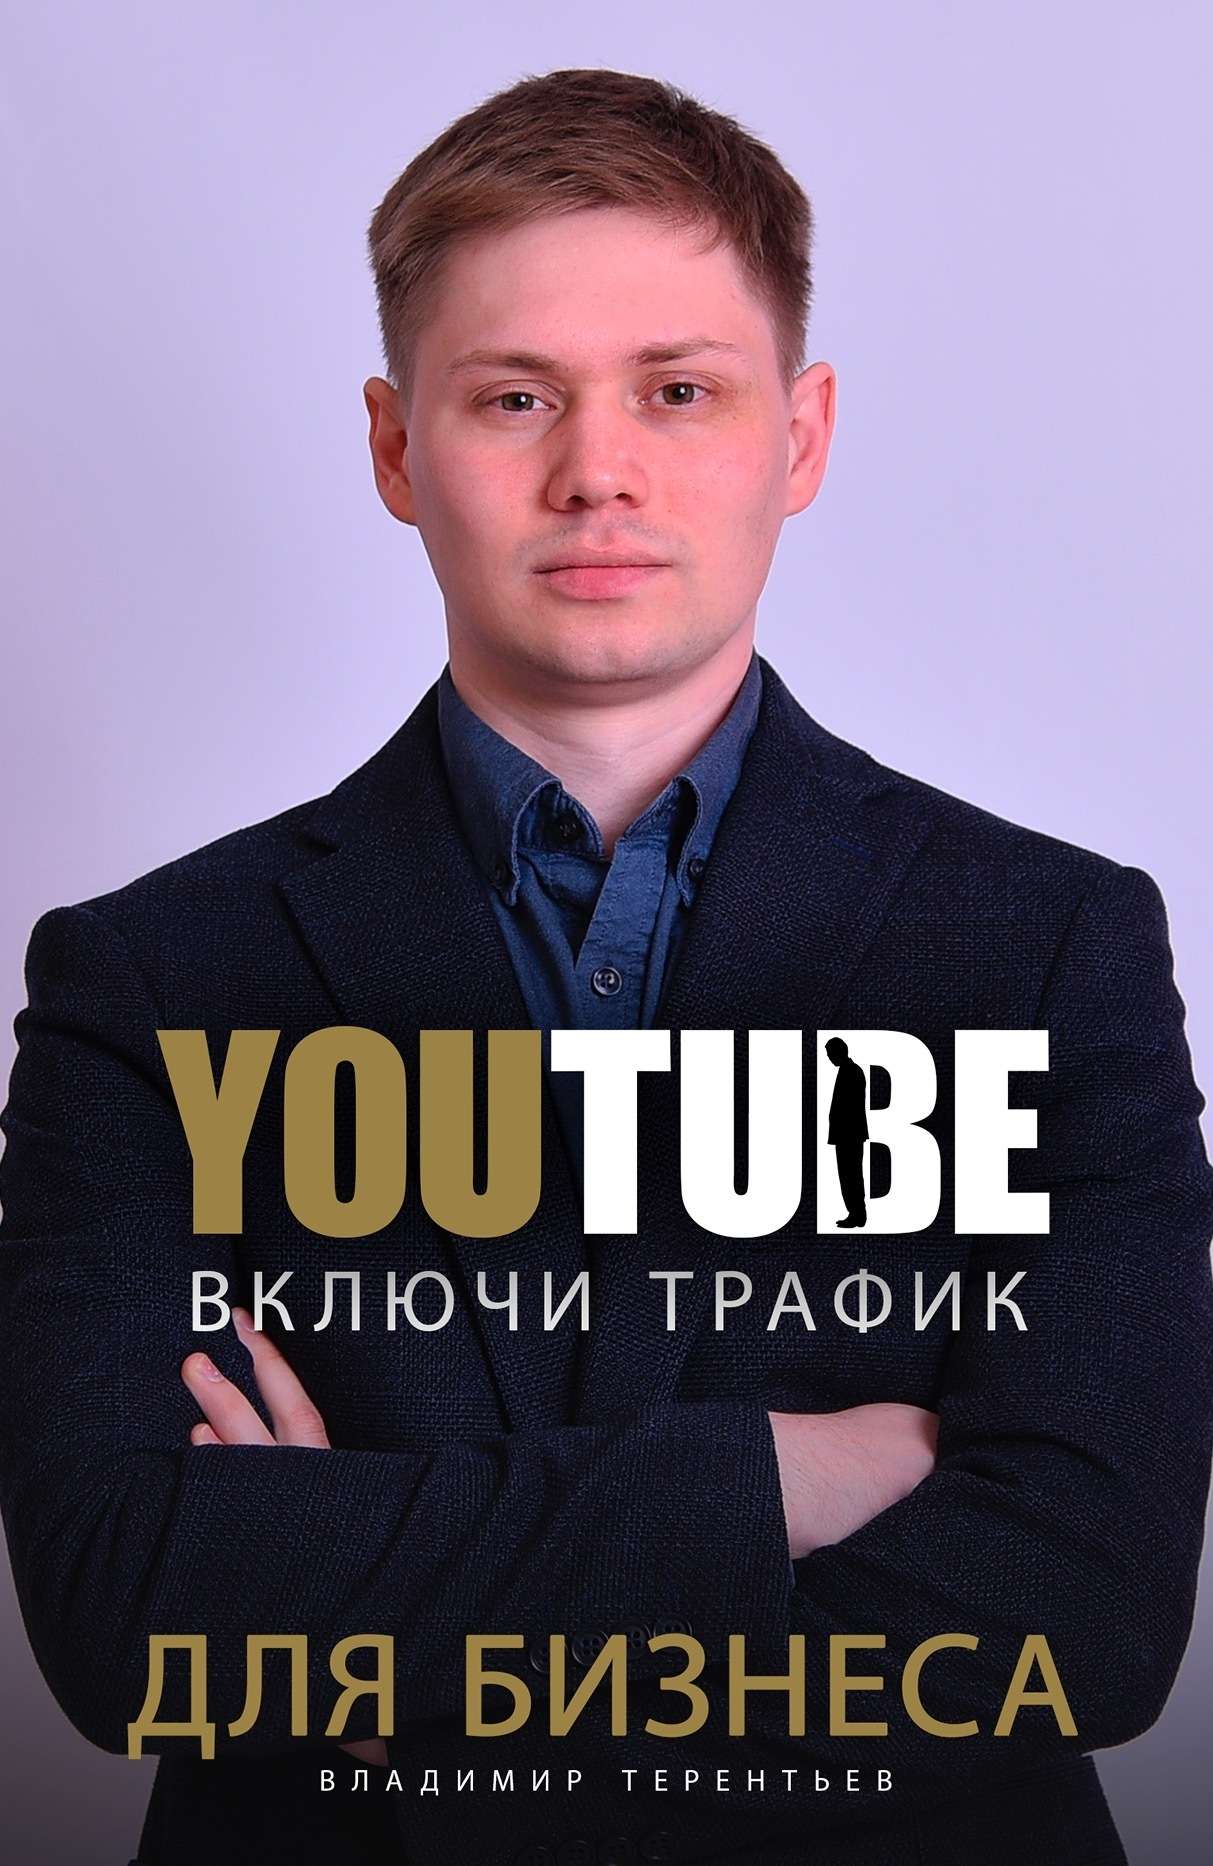 I will be your Youtube manager